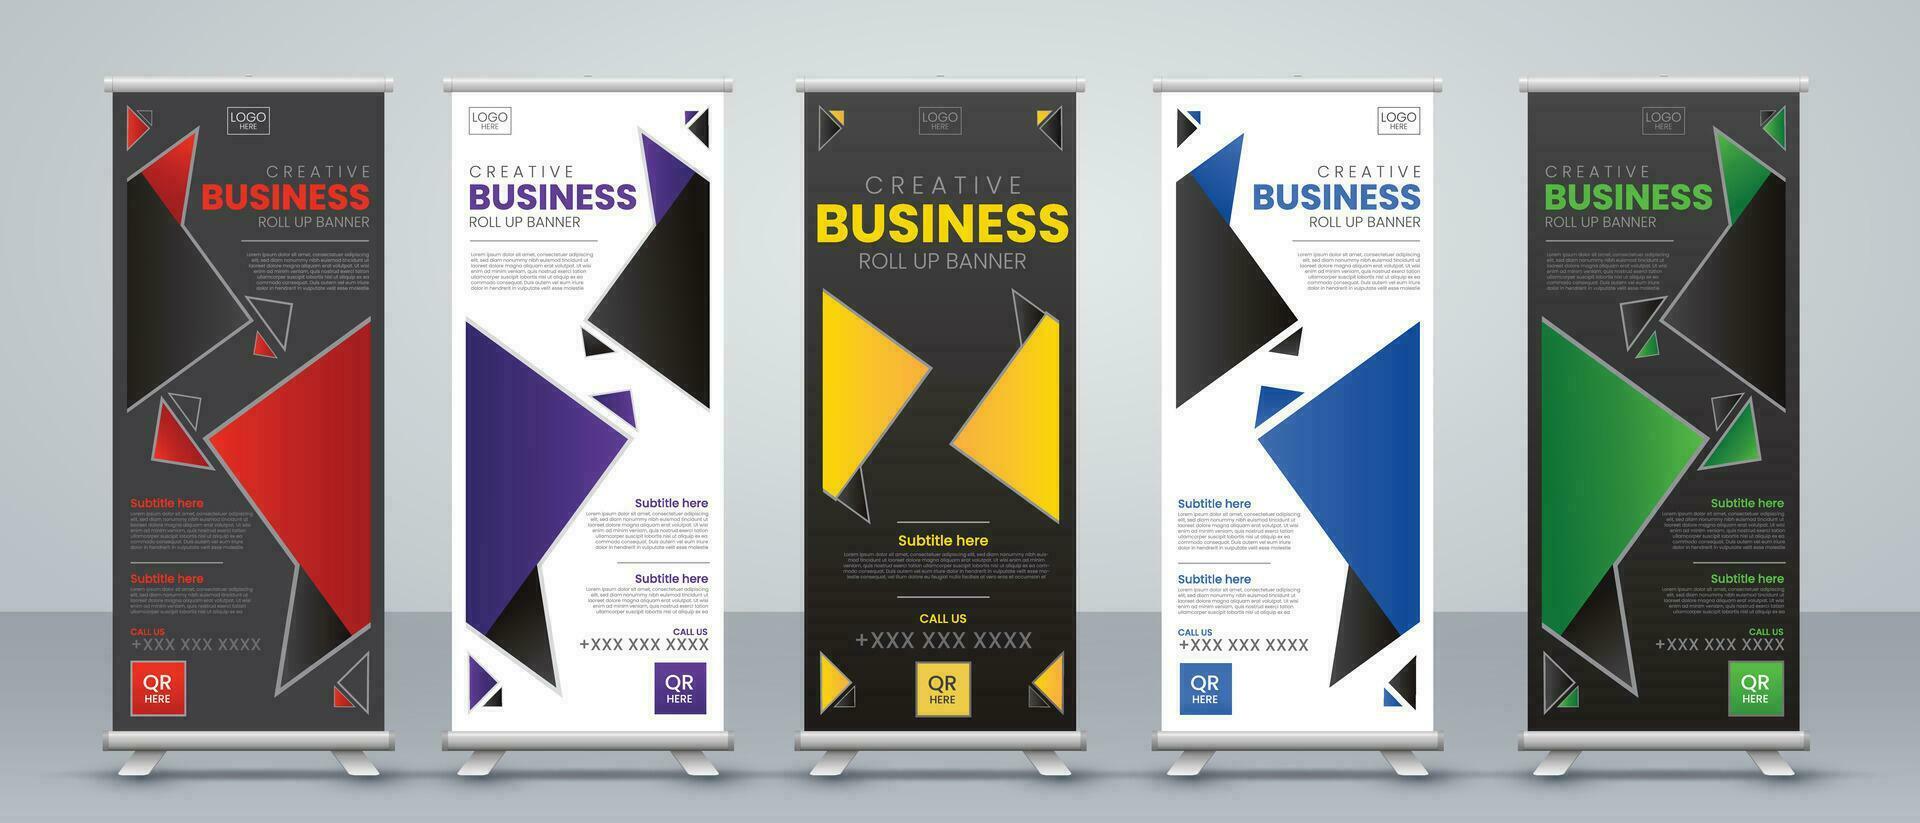 roll up banner design for events, presentations, annual meetings, banners, marking, sales, with dark and light modes with print ready red, purple, green and blue colors vector